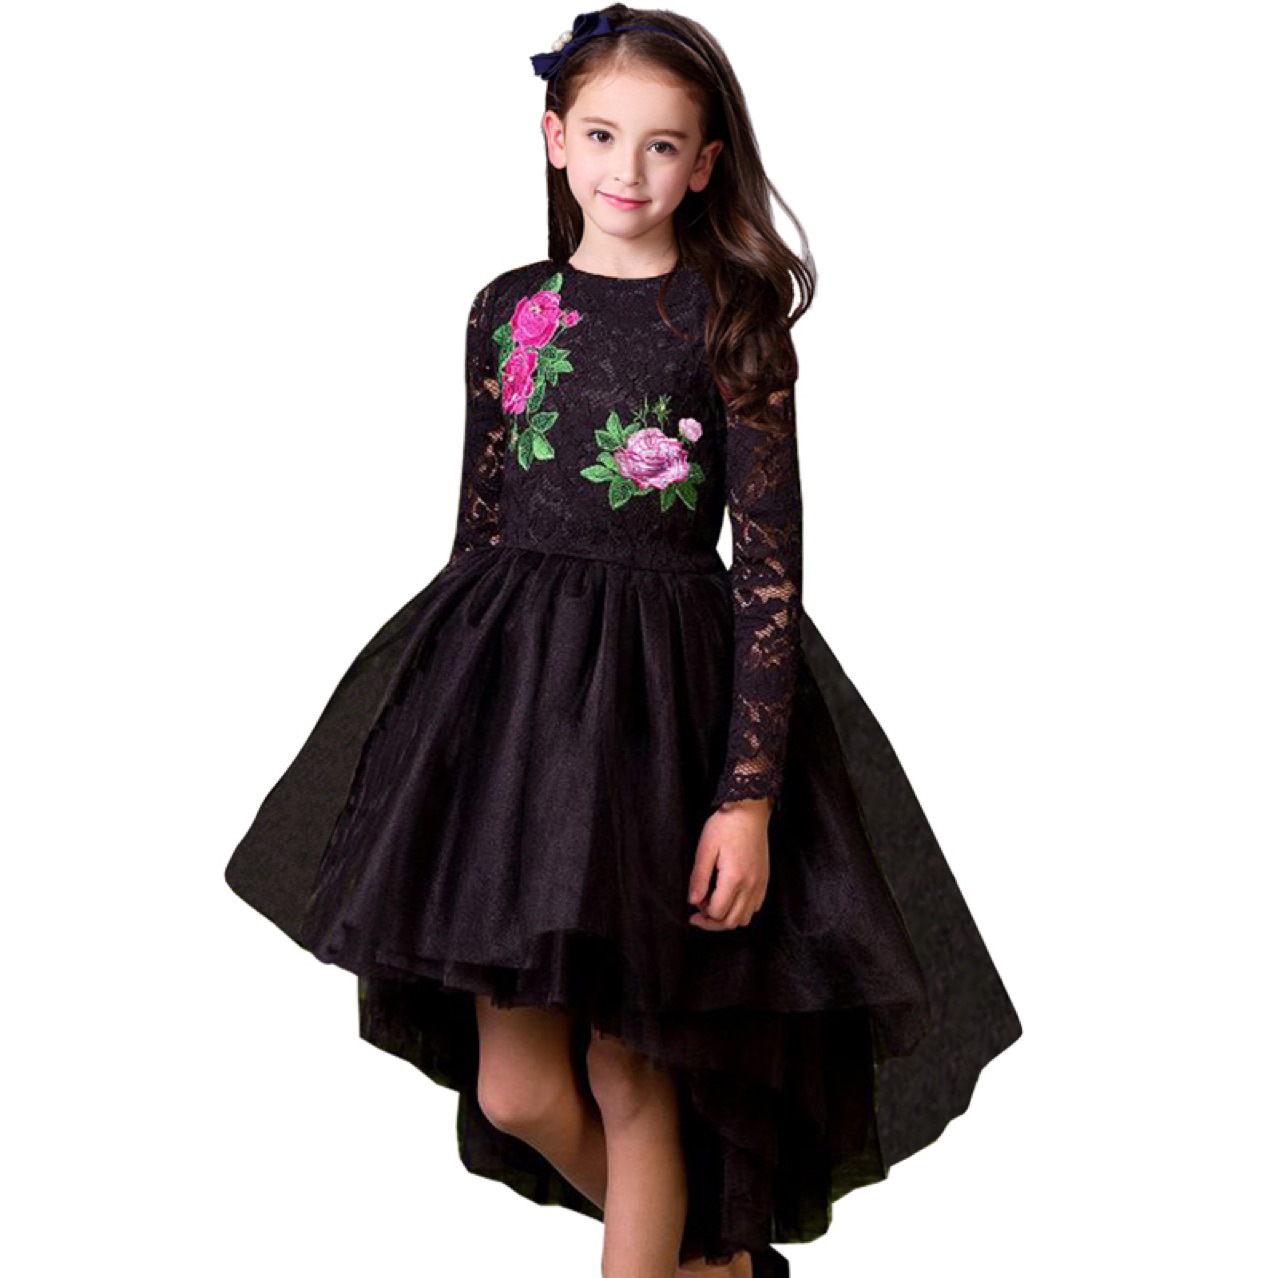 

Retail girls dress baby girl lace flower embroidery mermaid black evening dresses kids party skirt tutu children boutique luxury clothing